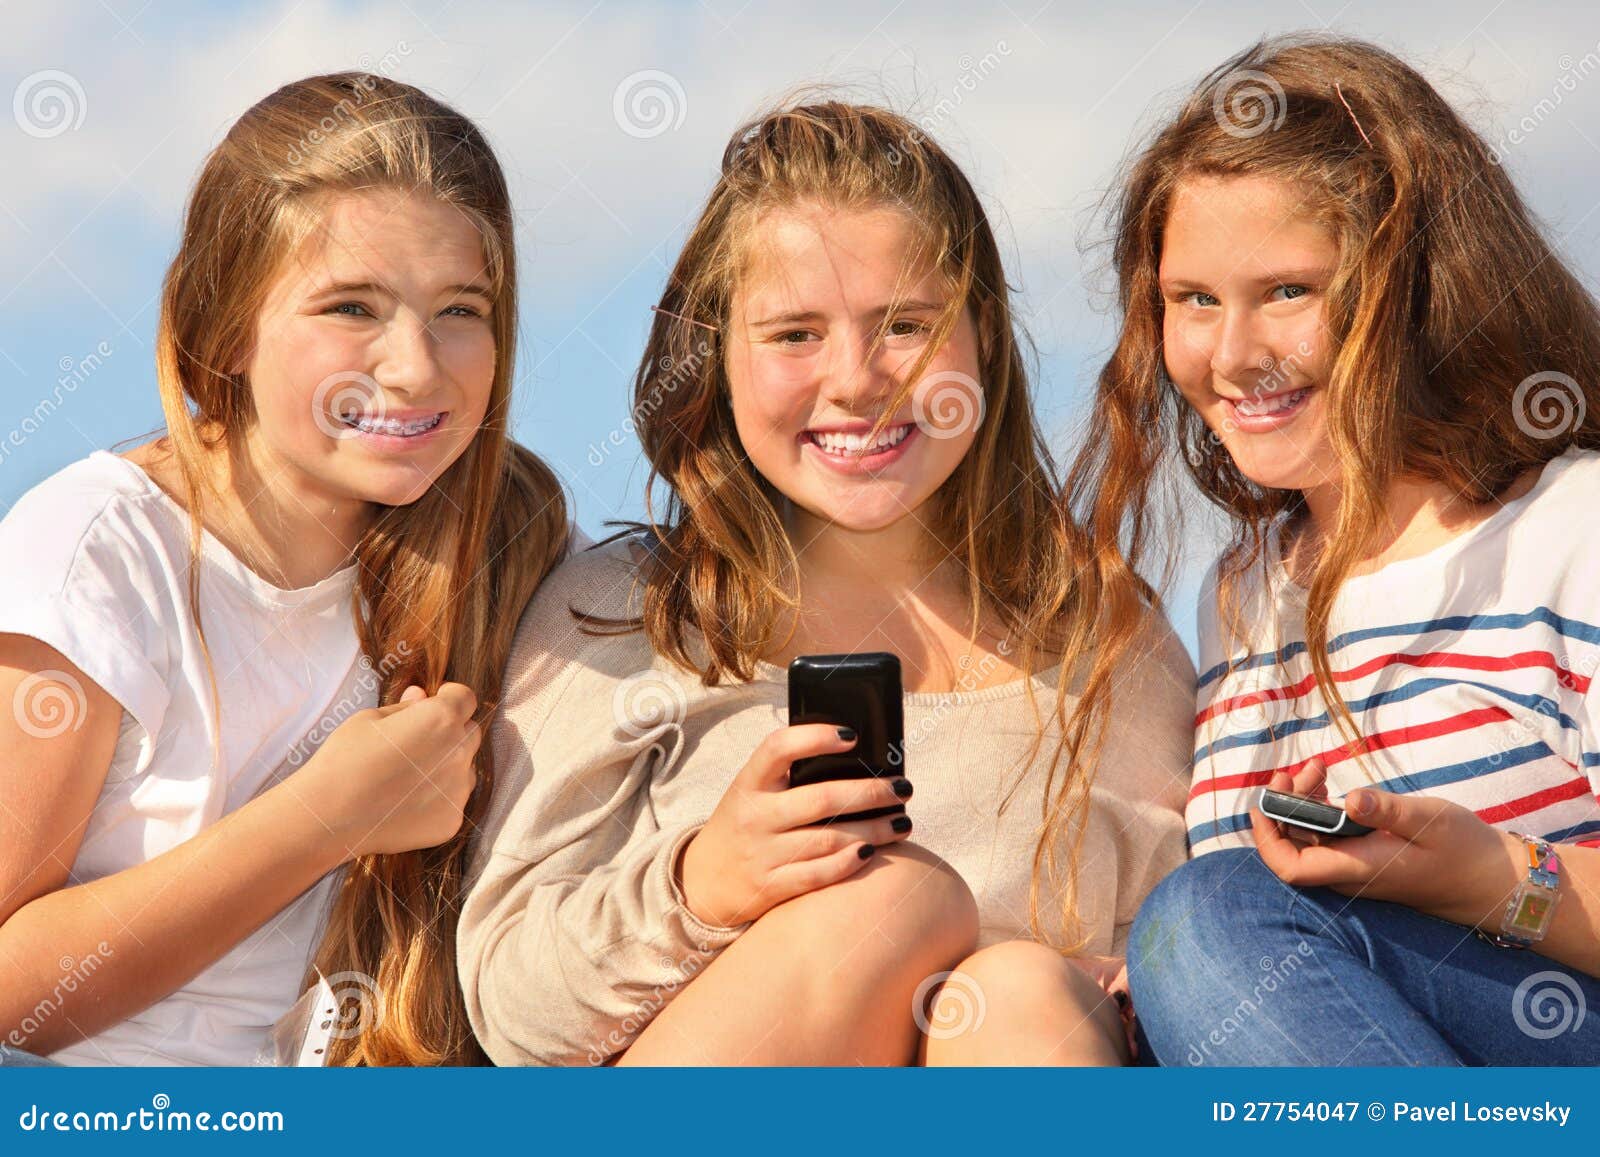 Three Girls Sit with Mobile Phones and Smile Stock Image - Image of ...